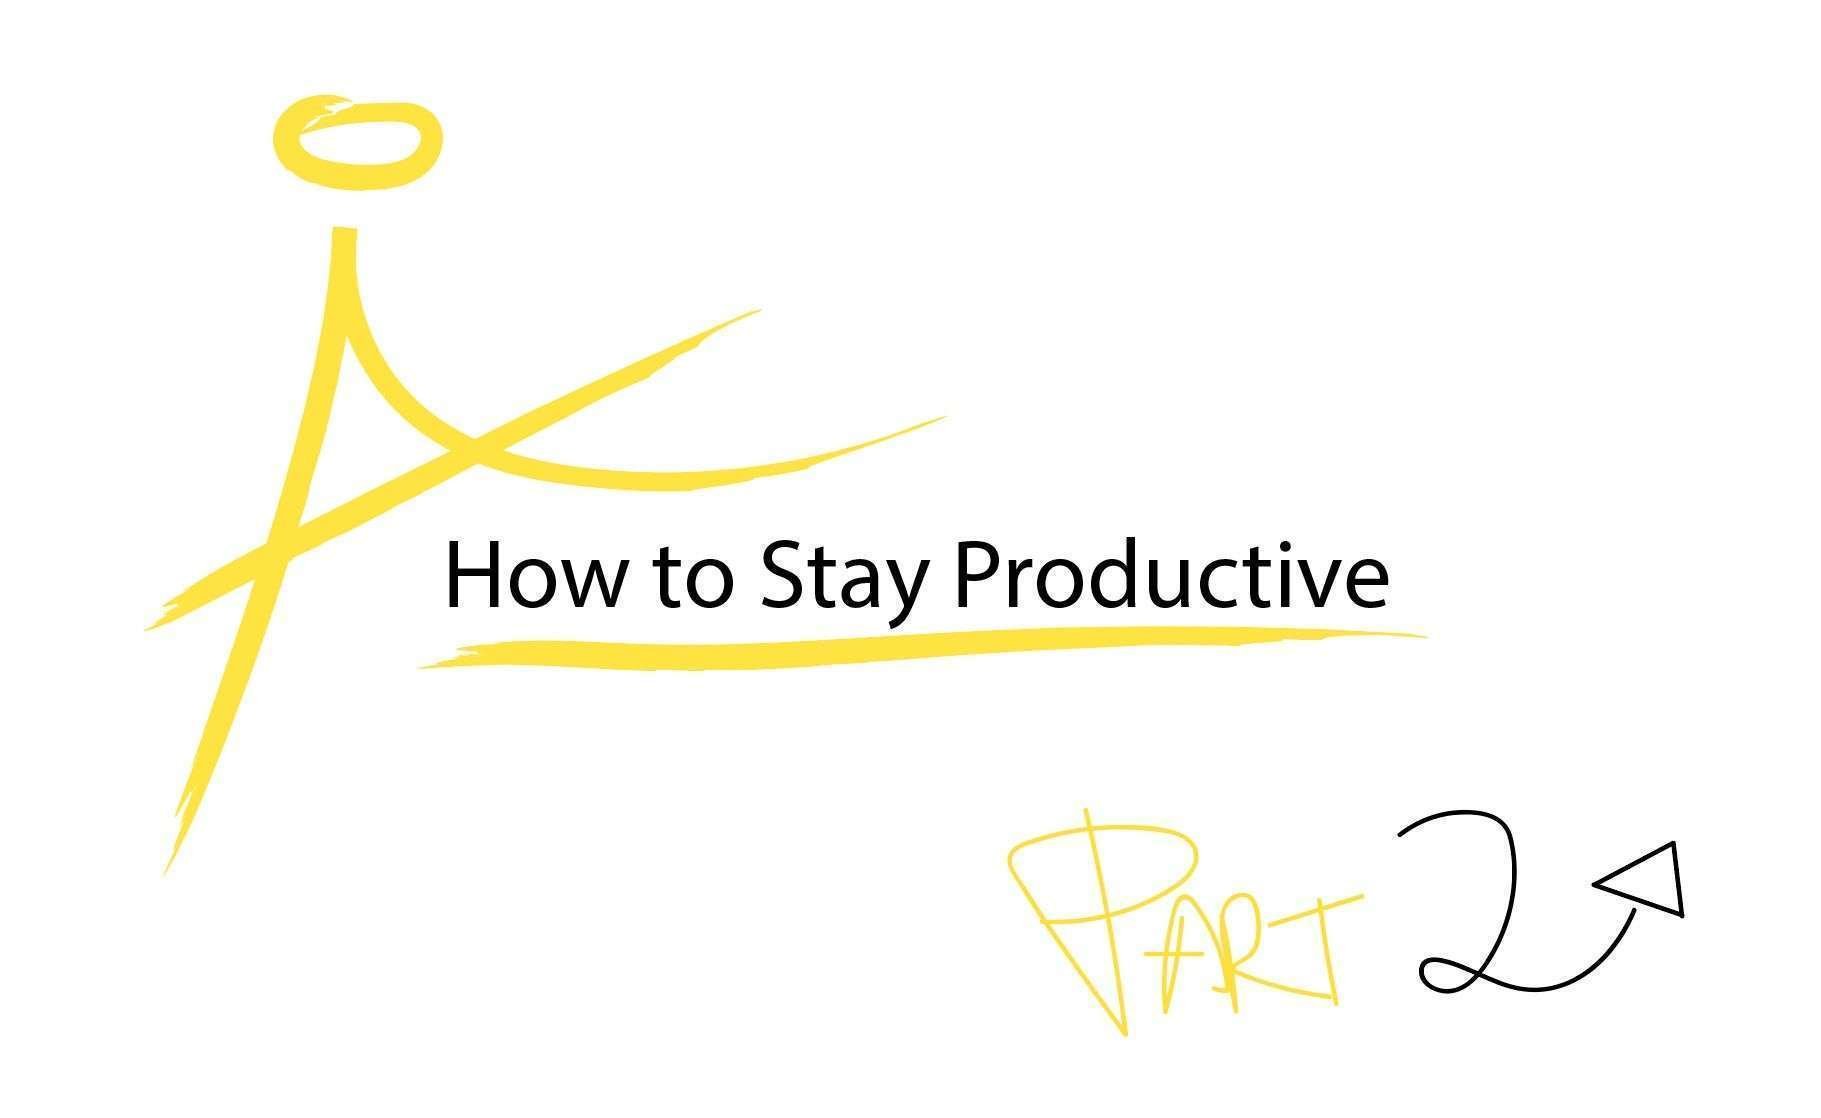 how to stay productive exercise regularly miroslavo blog